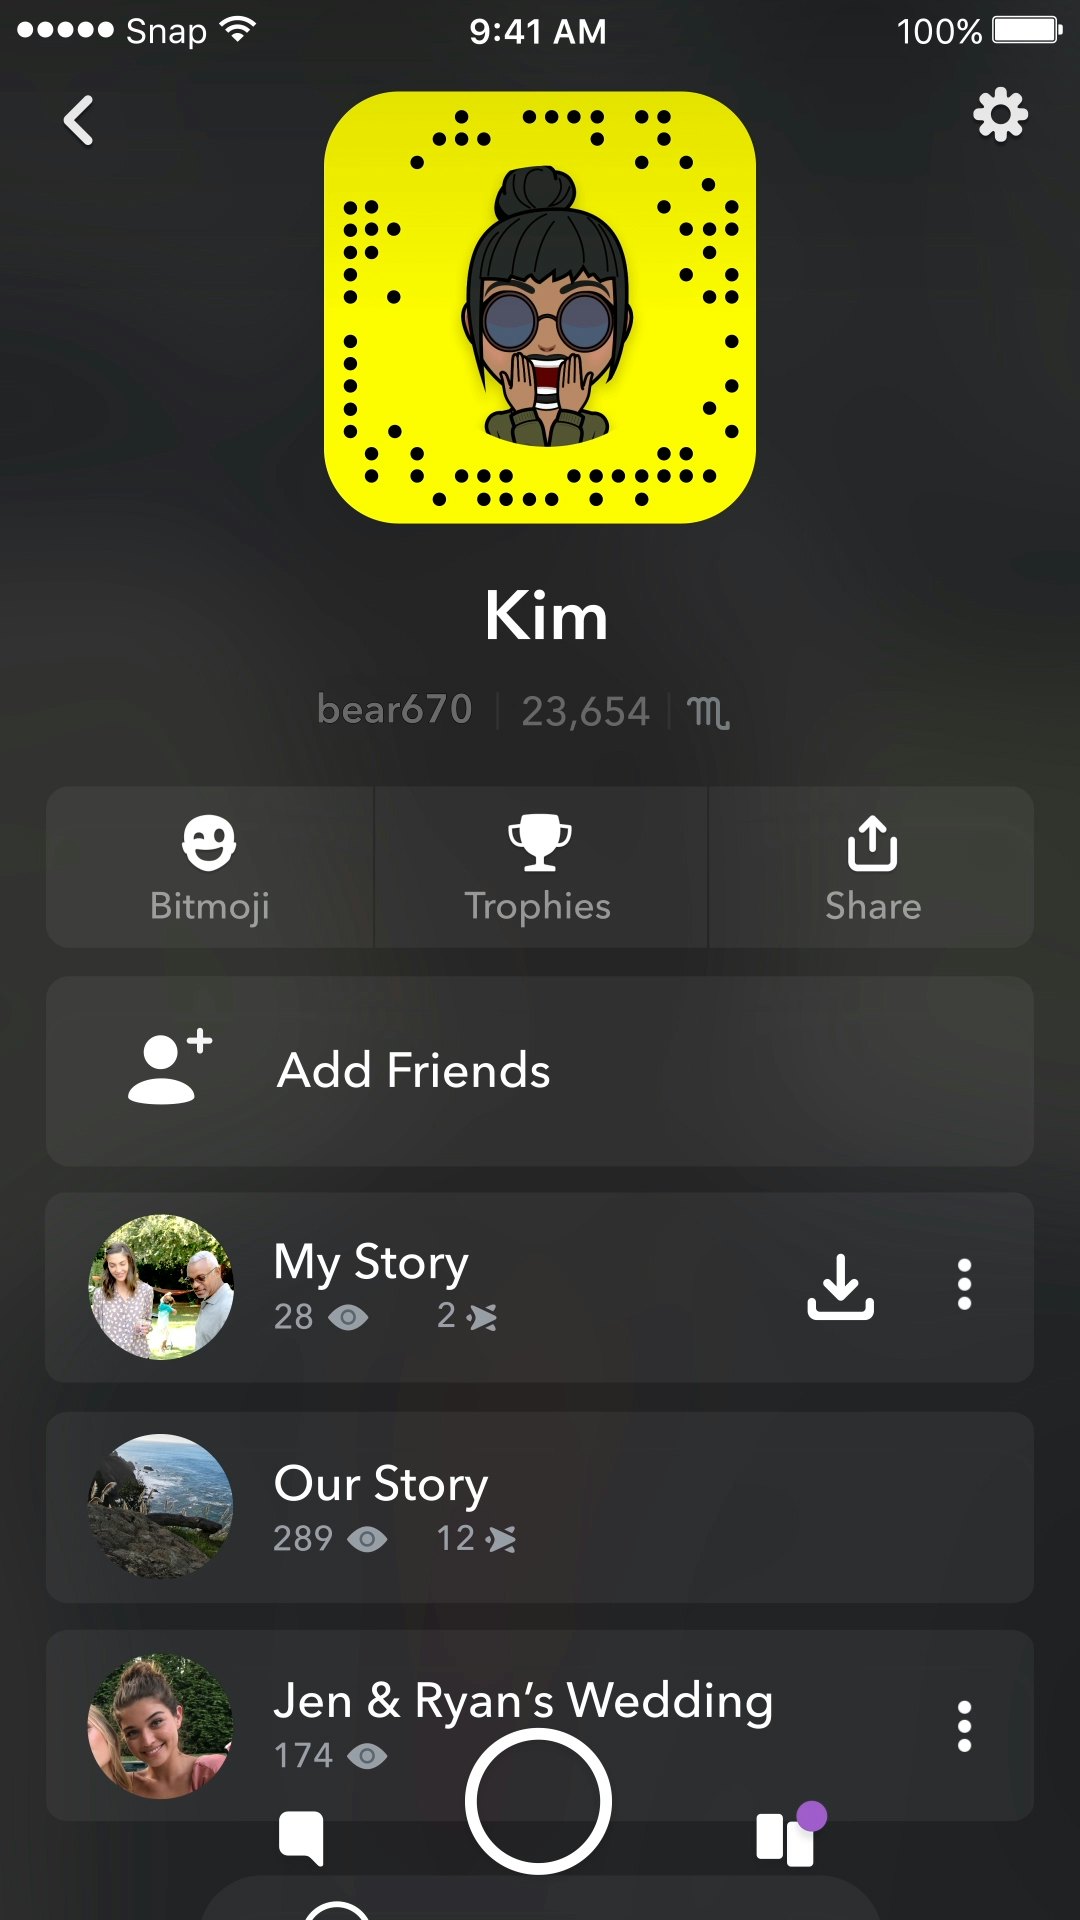 snapchat profile viewer online